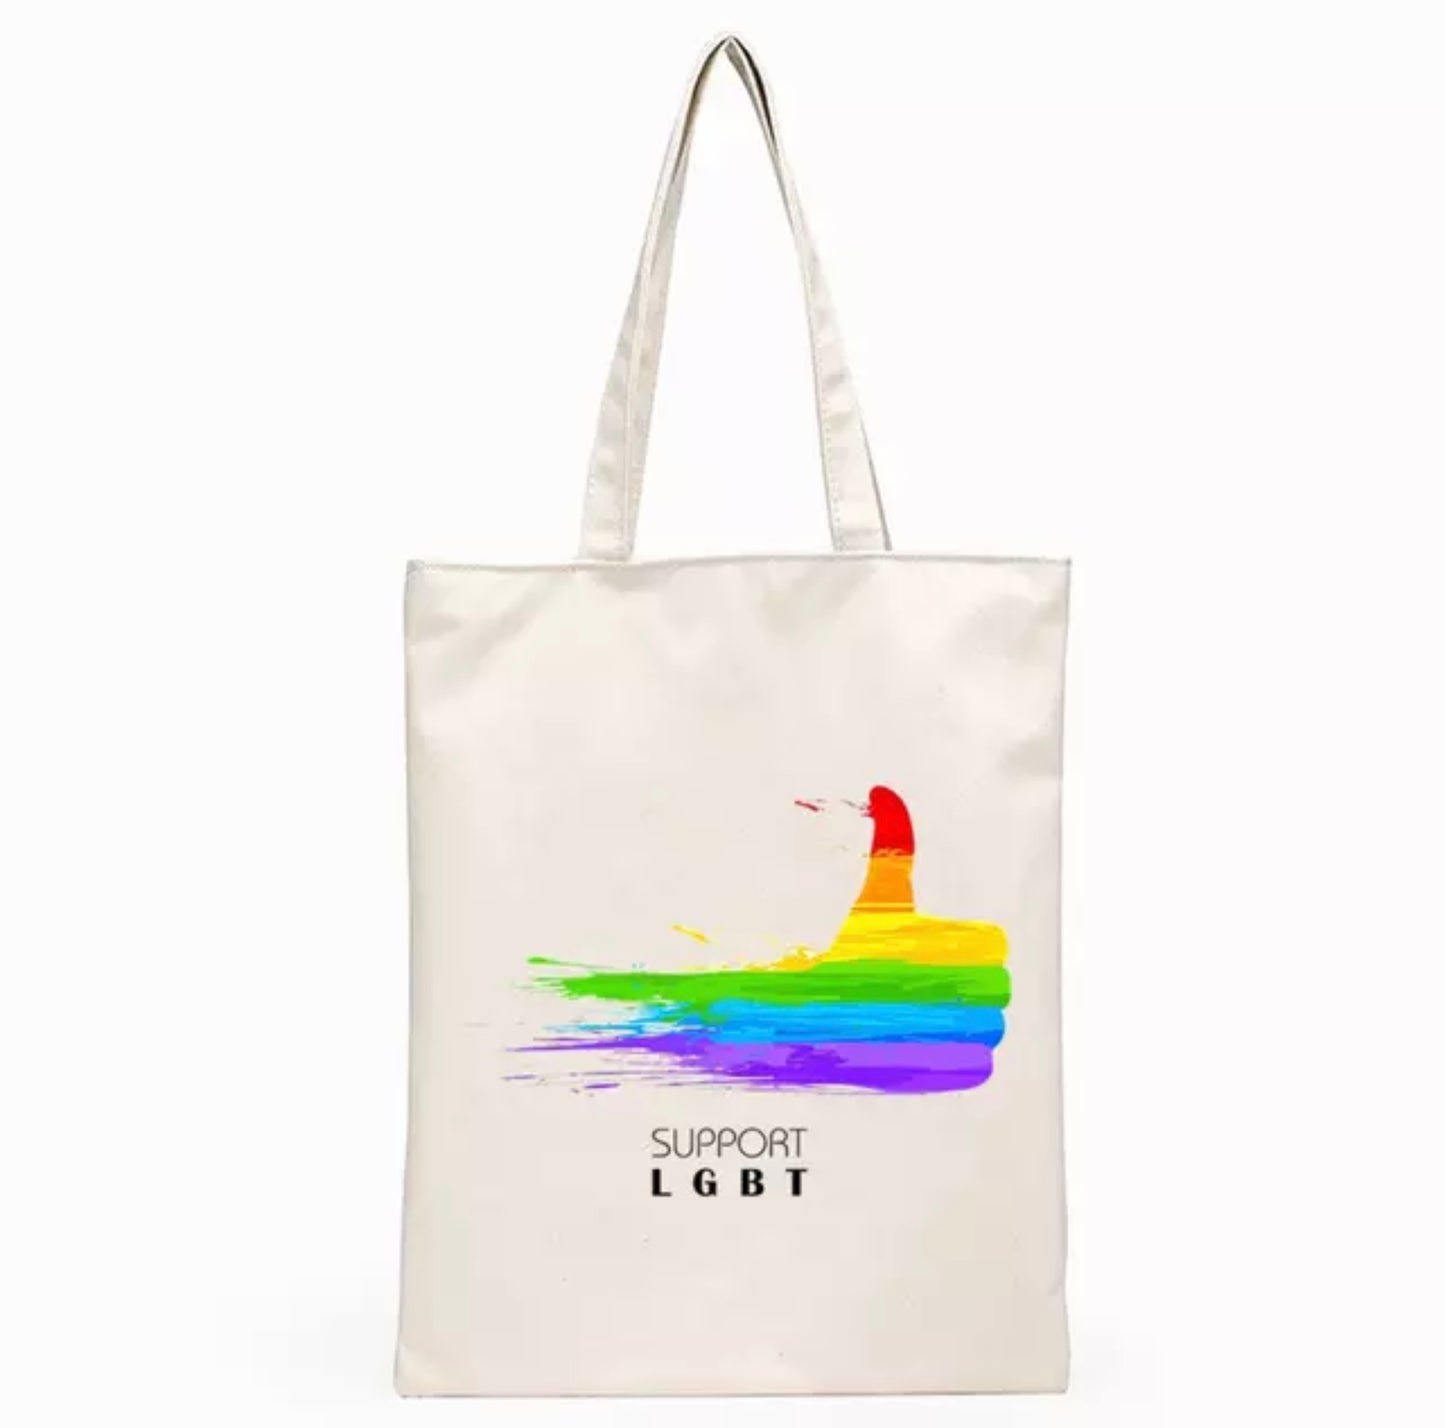 Tote Bag  (Support LGBT)